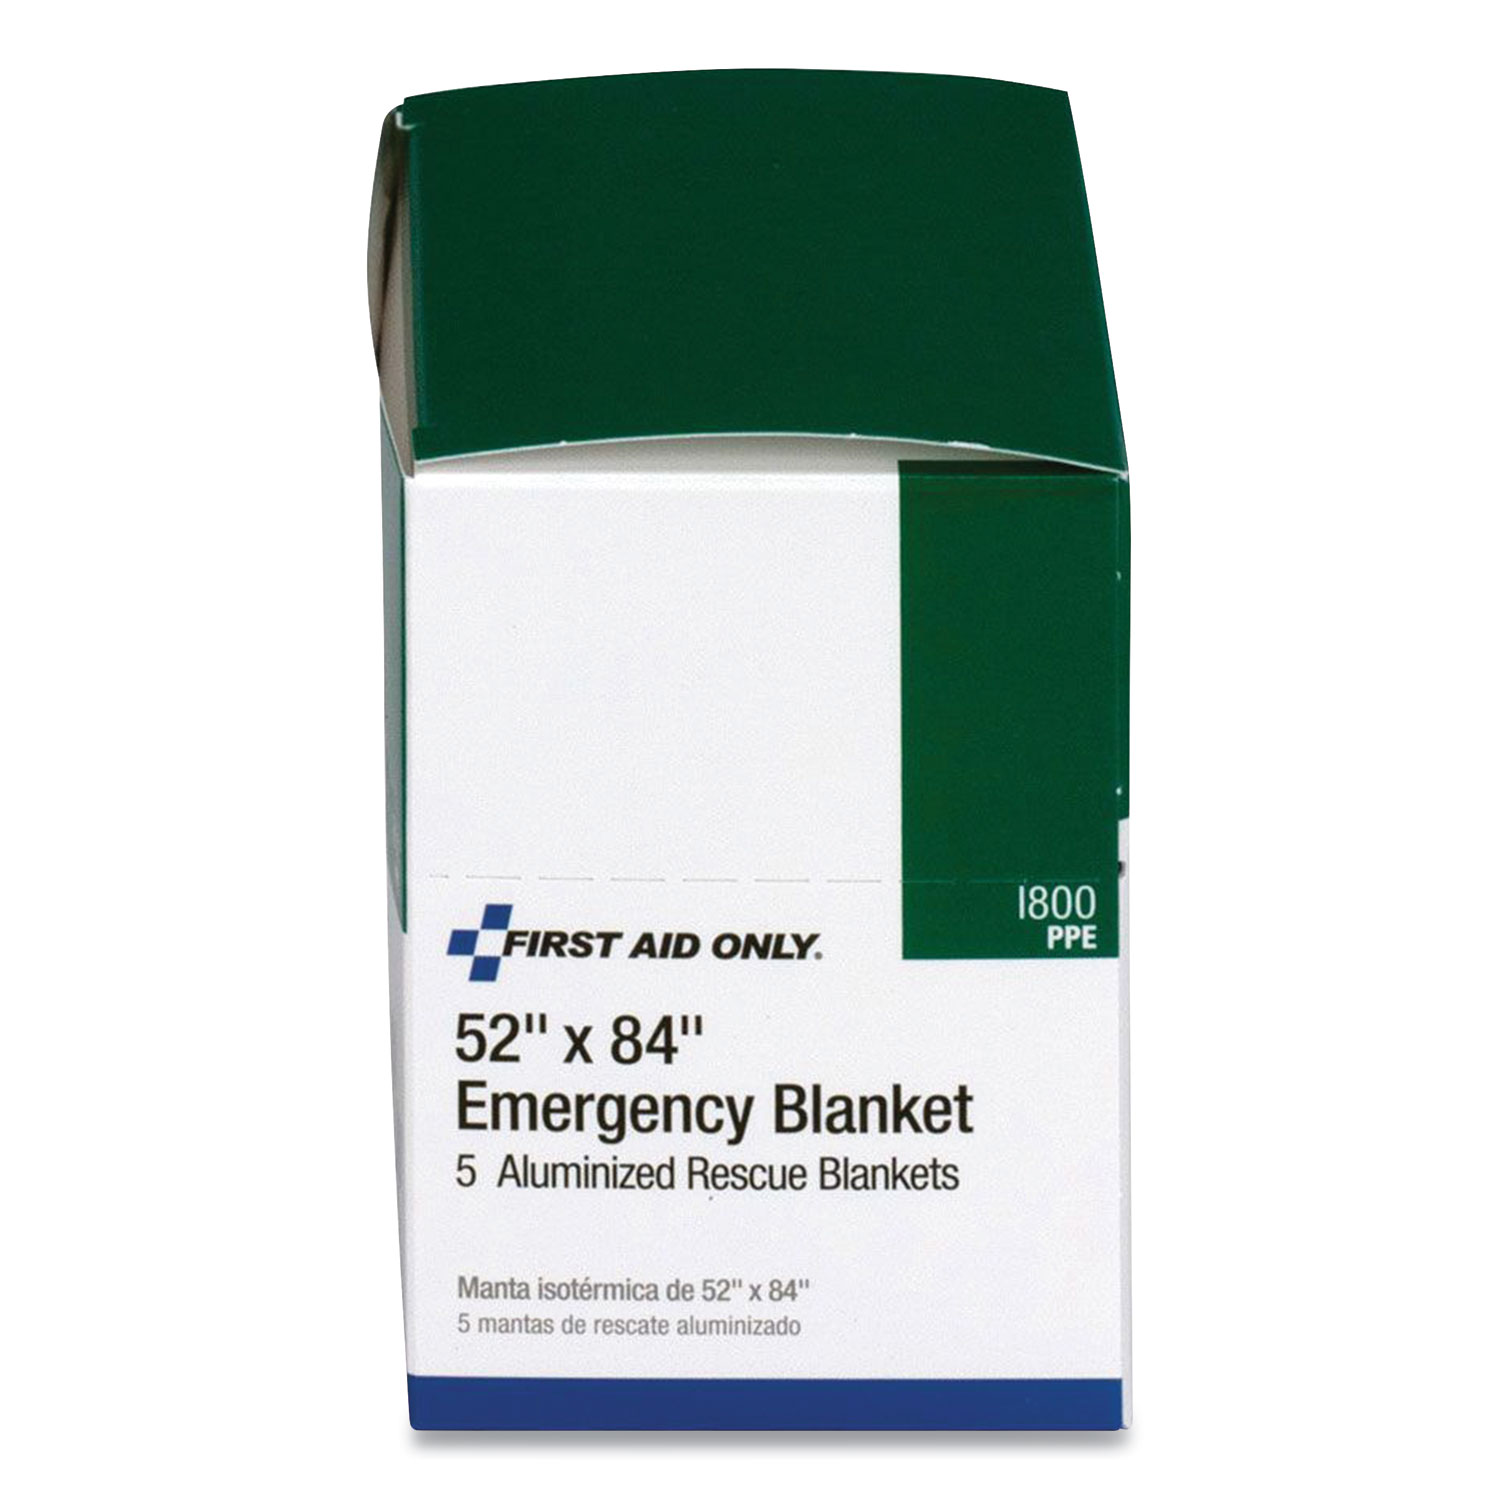 First Aid Only™ Aluminized Emergency Blanket, 52 x 84, 5/Box